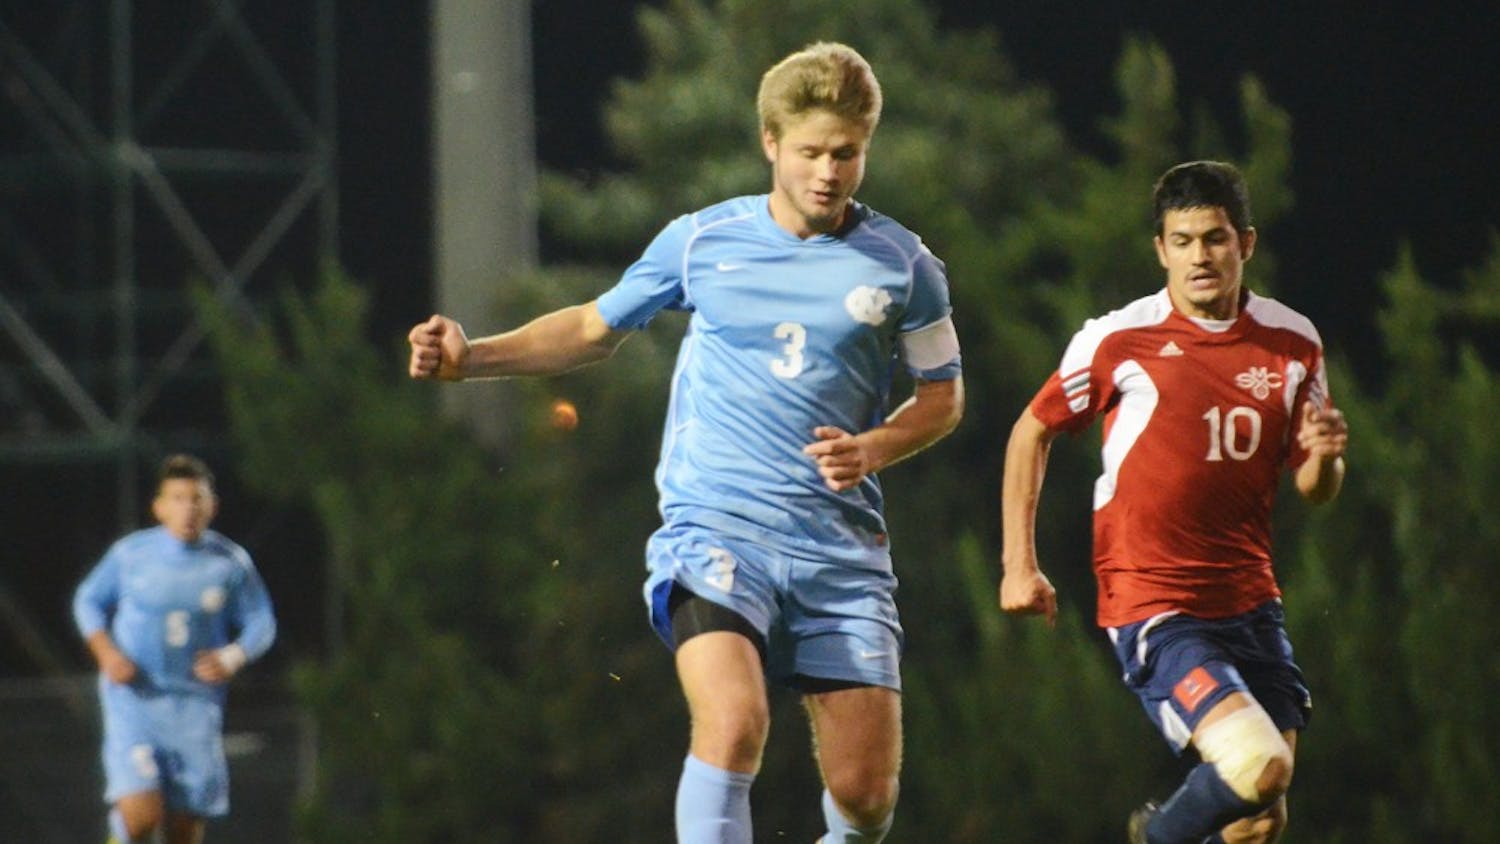 	Kirk Urso was the captain of the 2011 College Cup-winning UNC men’s soccer team. The Columbus Crew drafted him in 2012.